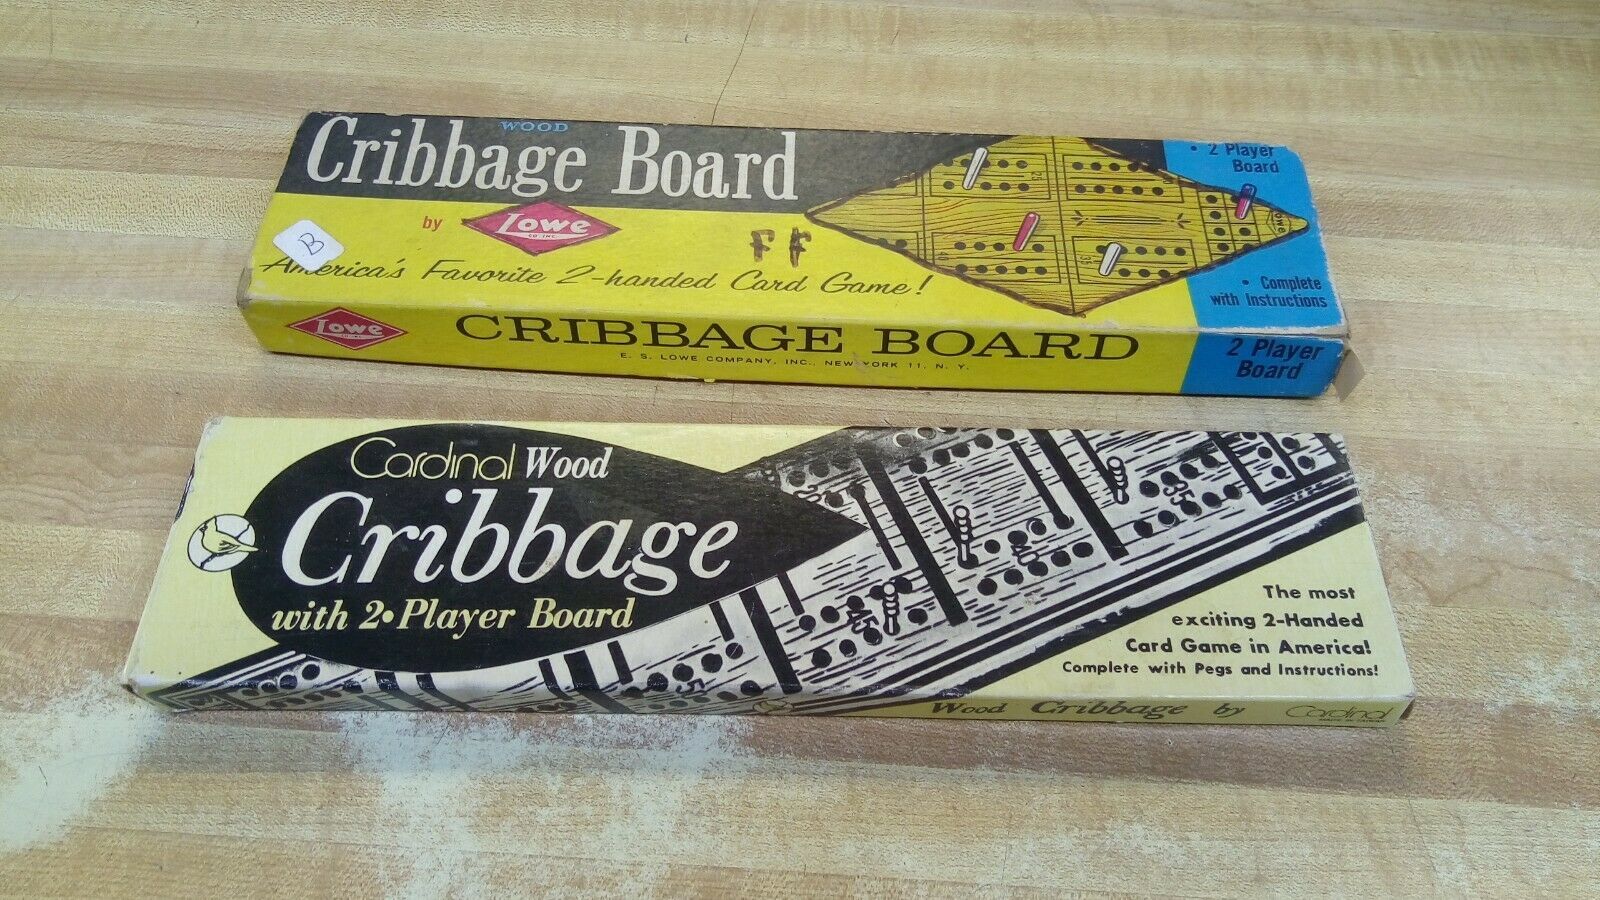  Lot of Two Cribbage Boards Vintage Wood Box Lowe Cardinal  - $19.87